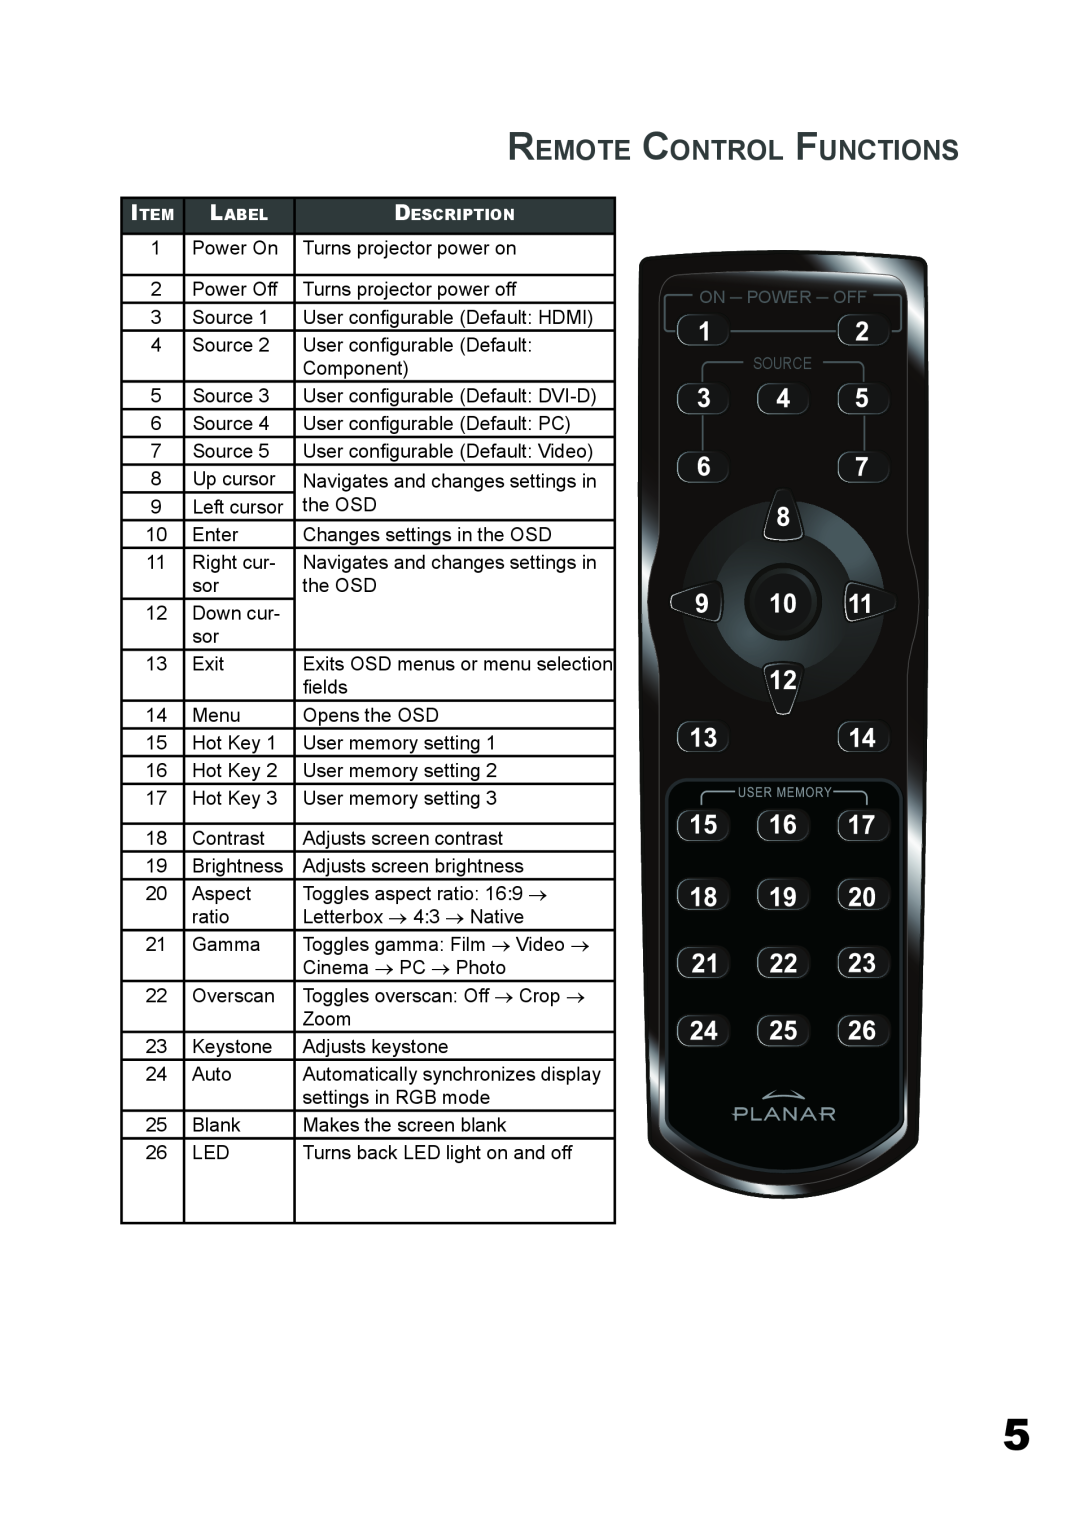 Planar PD4010 manual Remote Control Functions, On Power Off Source 